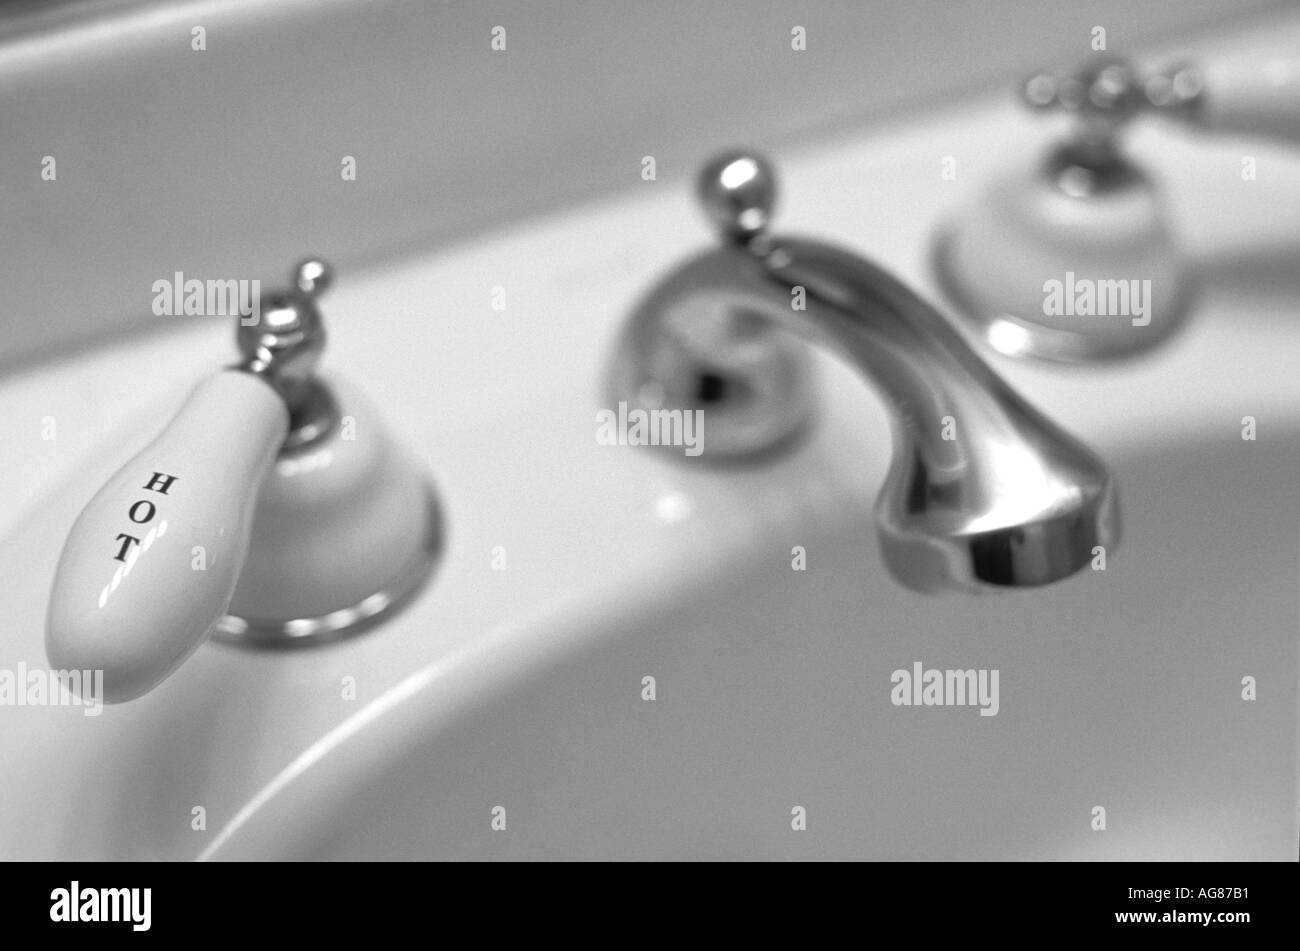 Sink water faucet with work Hot in focus Stock Photo